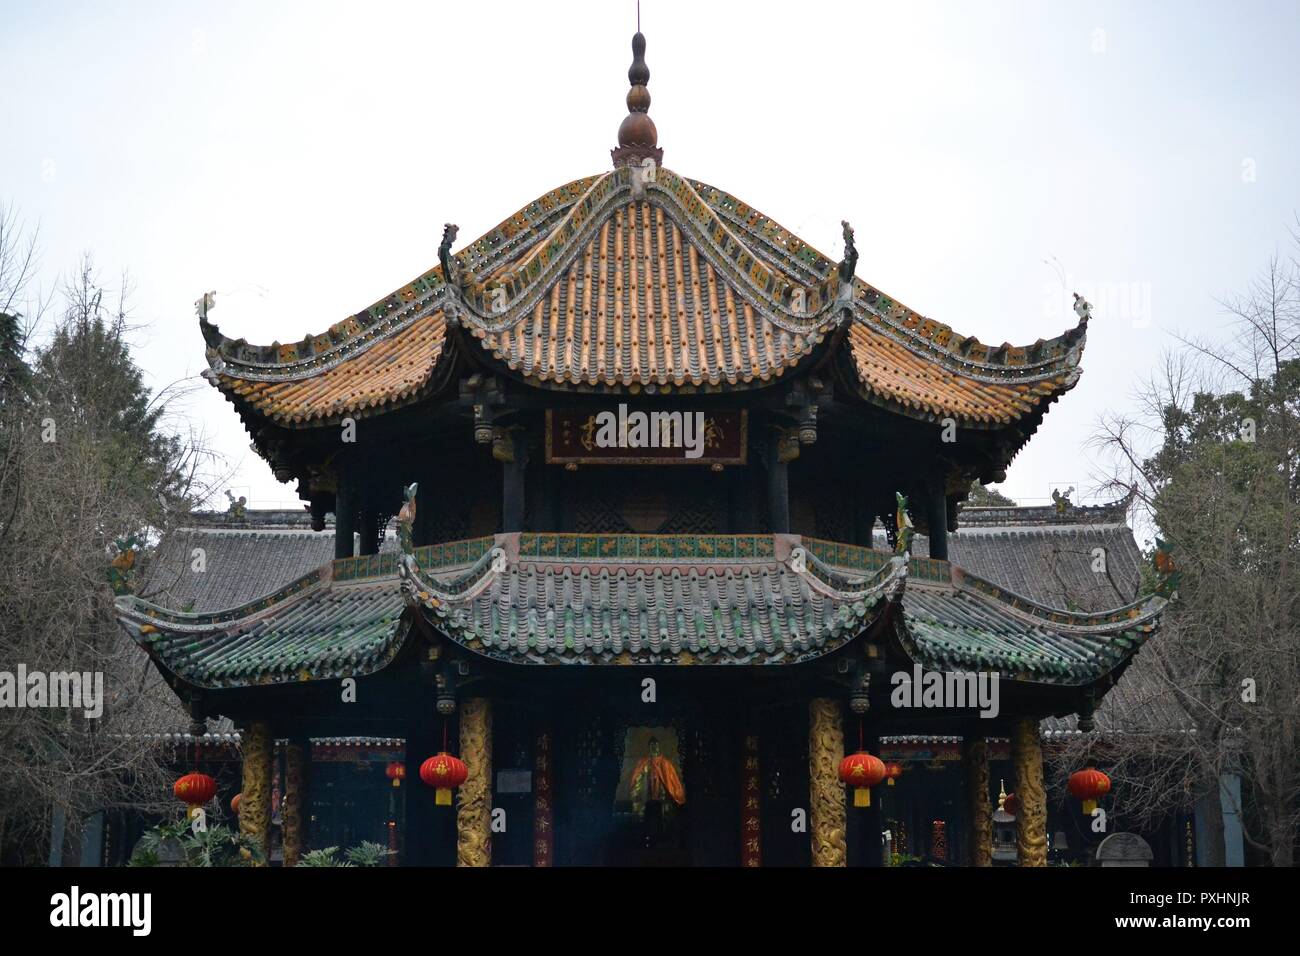 Temple in Beatiful old town of Chengdu, Sichuan, China Stock Photo